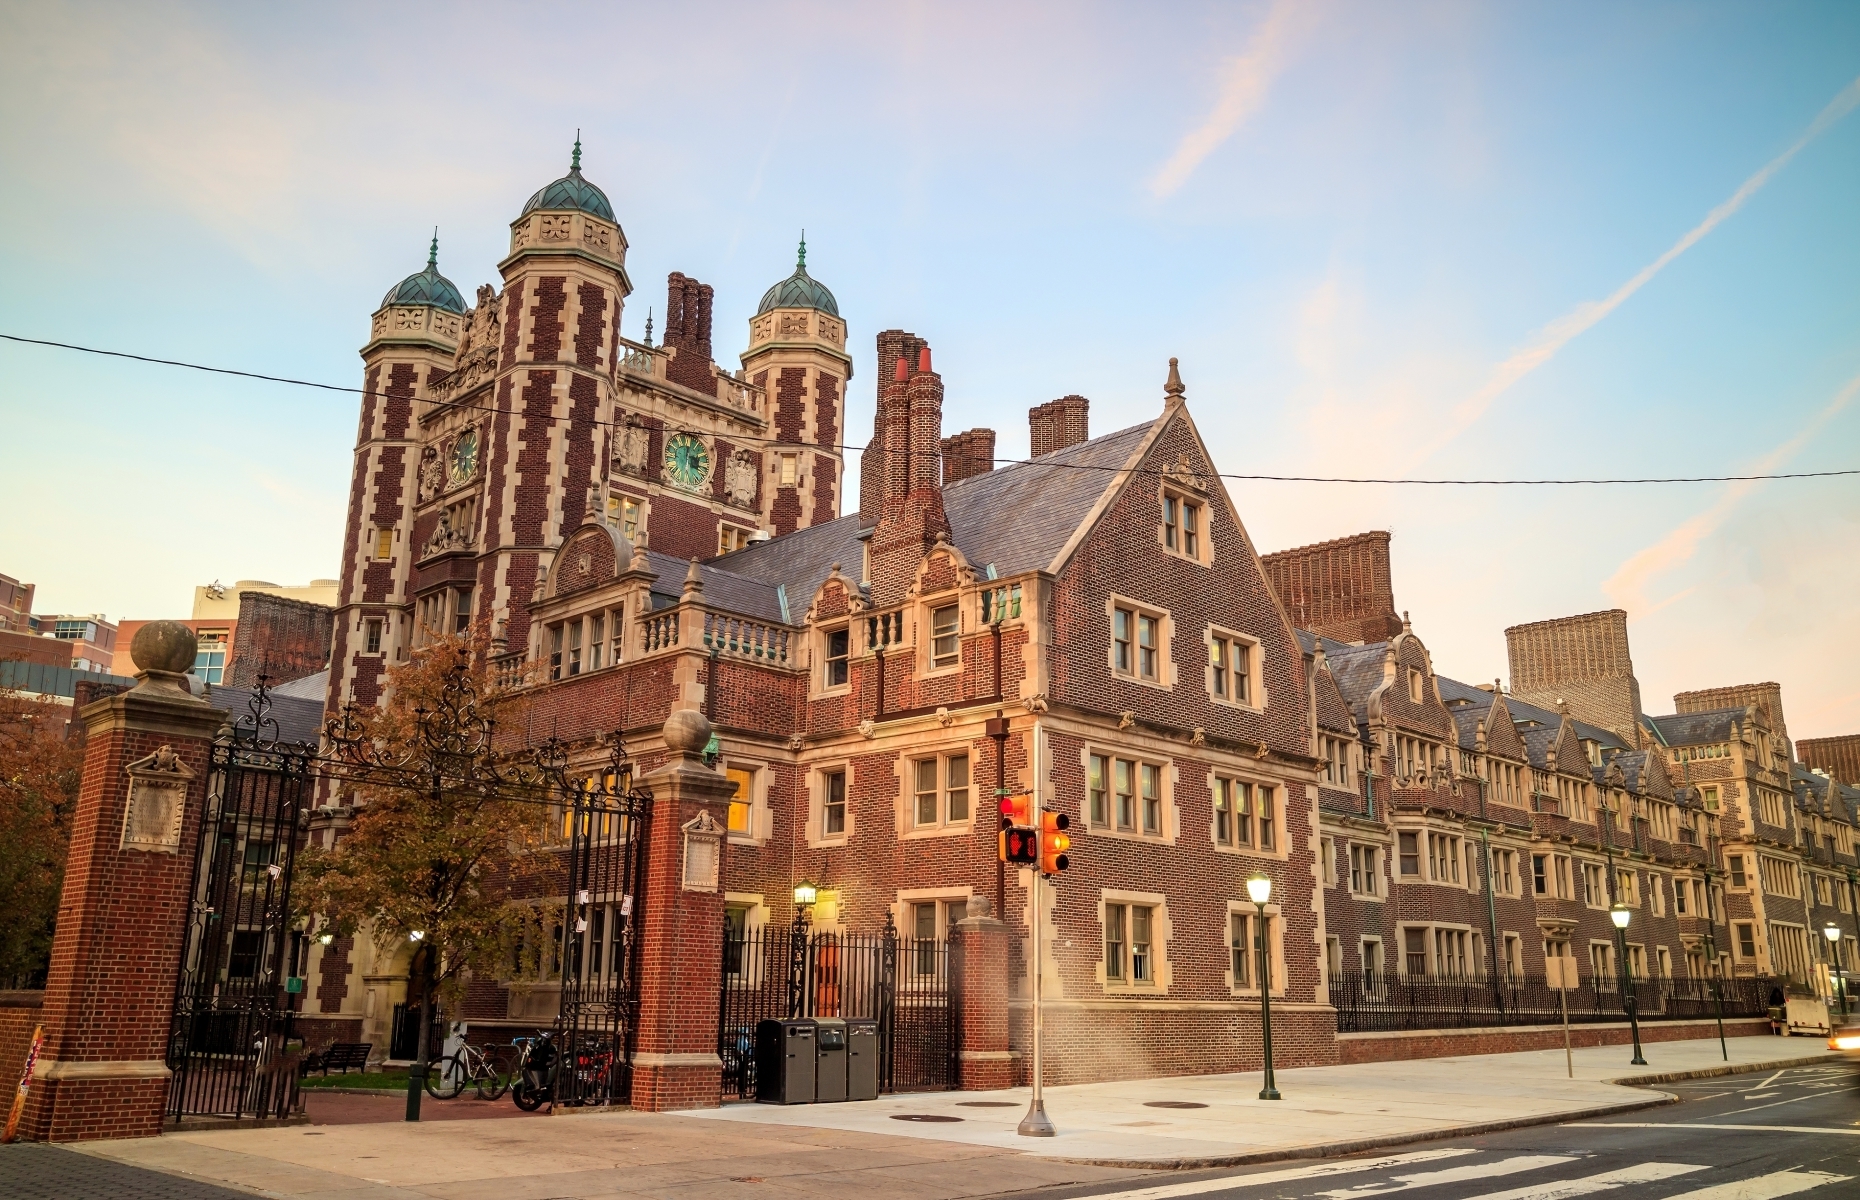 <p><a href="https://www.upenn.edu/" rel="noreferrer noopener">University of Pennsylvania</a> is another Ivy League school known for its spectacular architecture, with wide-open quads bordered by looming Gothic towers and stone archways.</p>